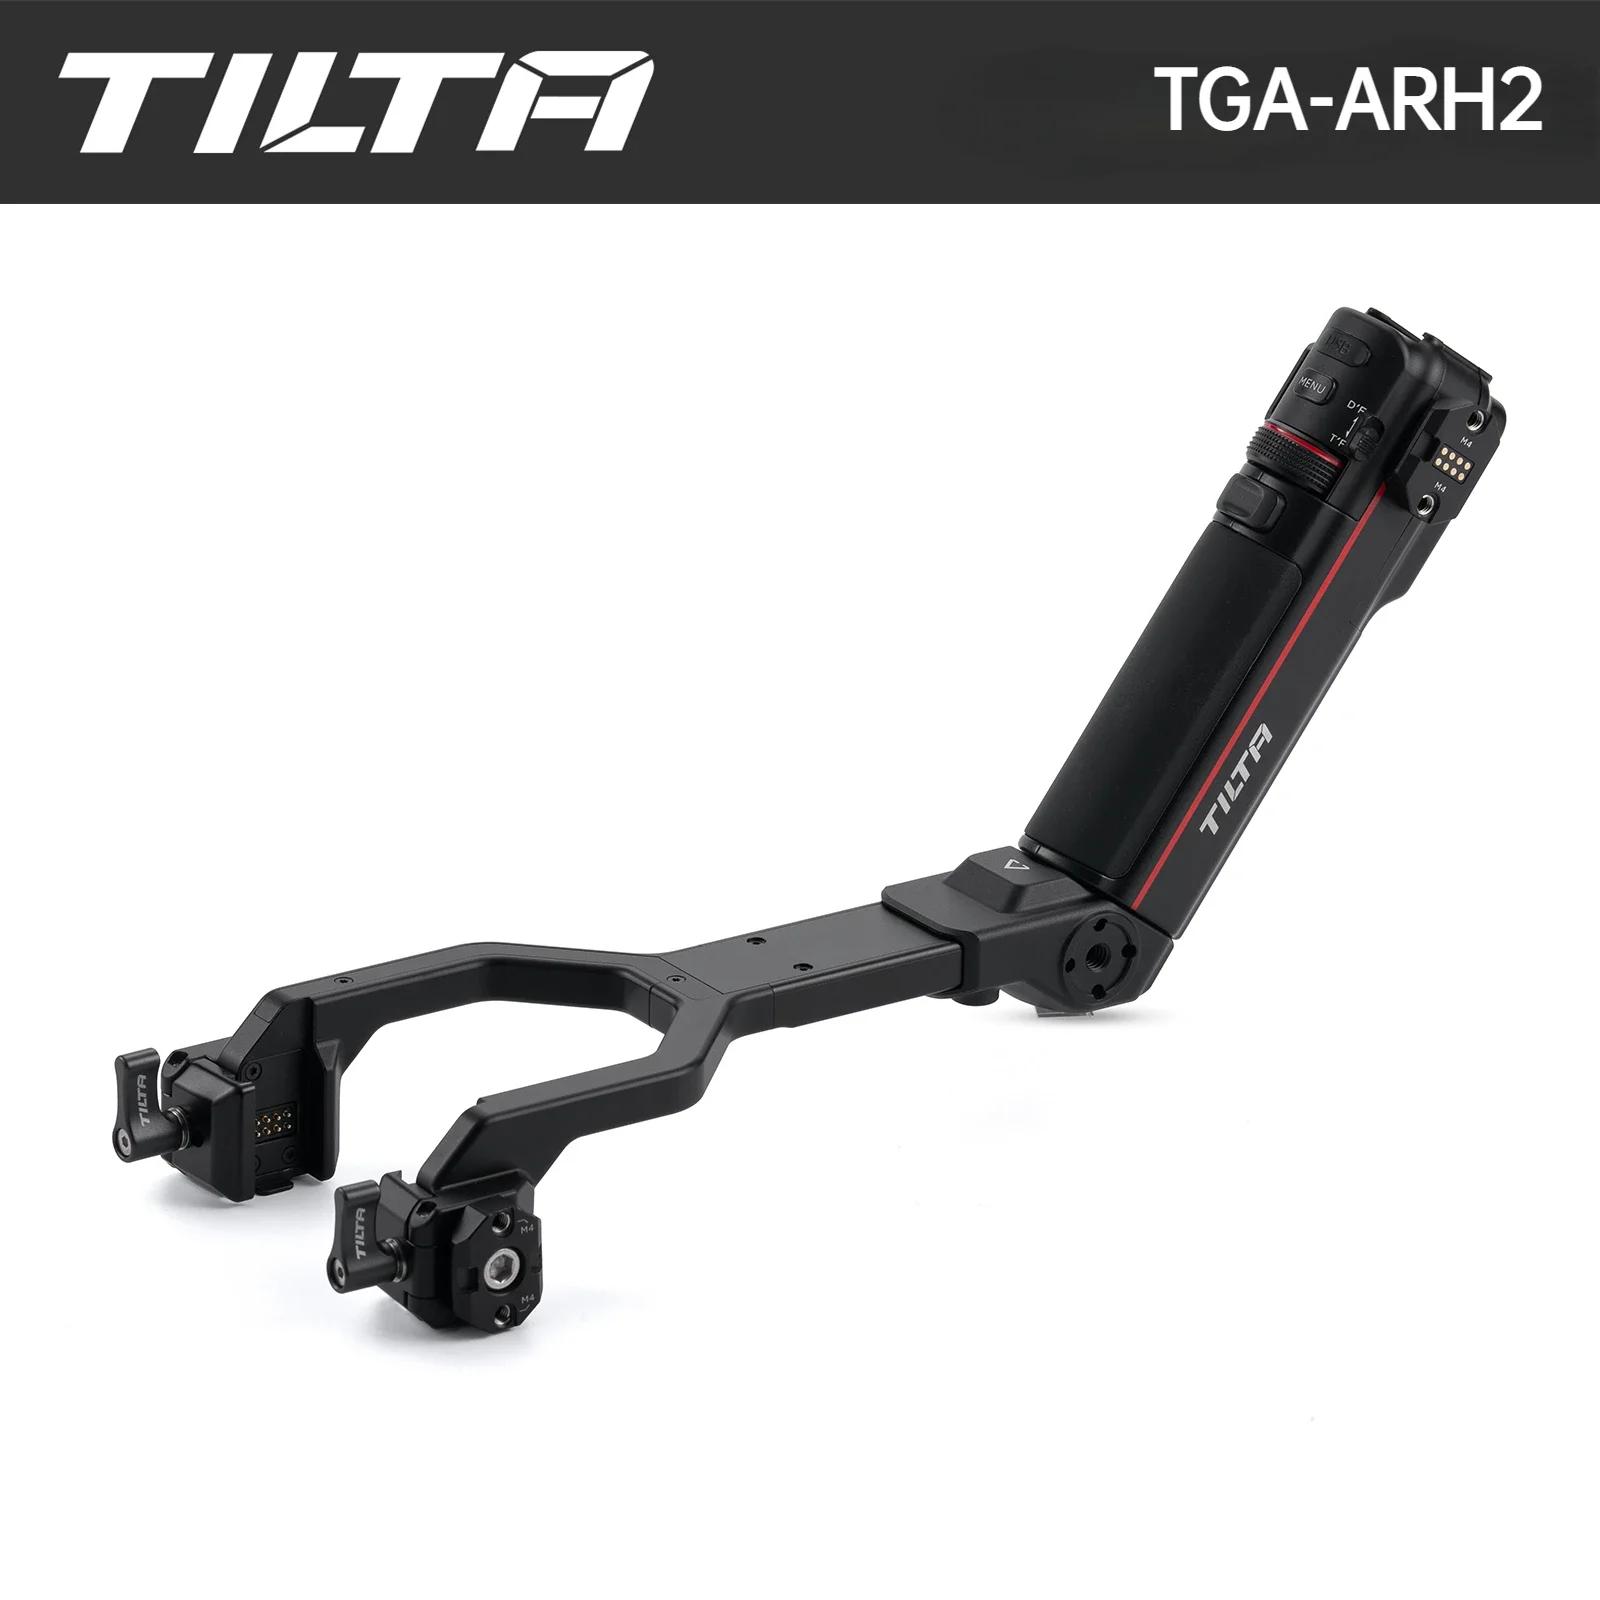 TILTA  ĸ  Ʈ ڵ TGA-ARH2, DJI Ronin ø ڵ , DJI RS3 RS2